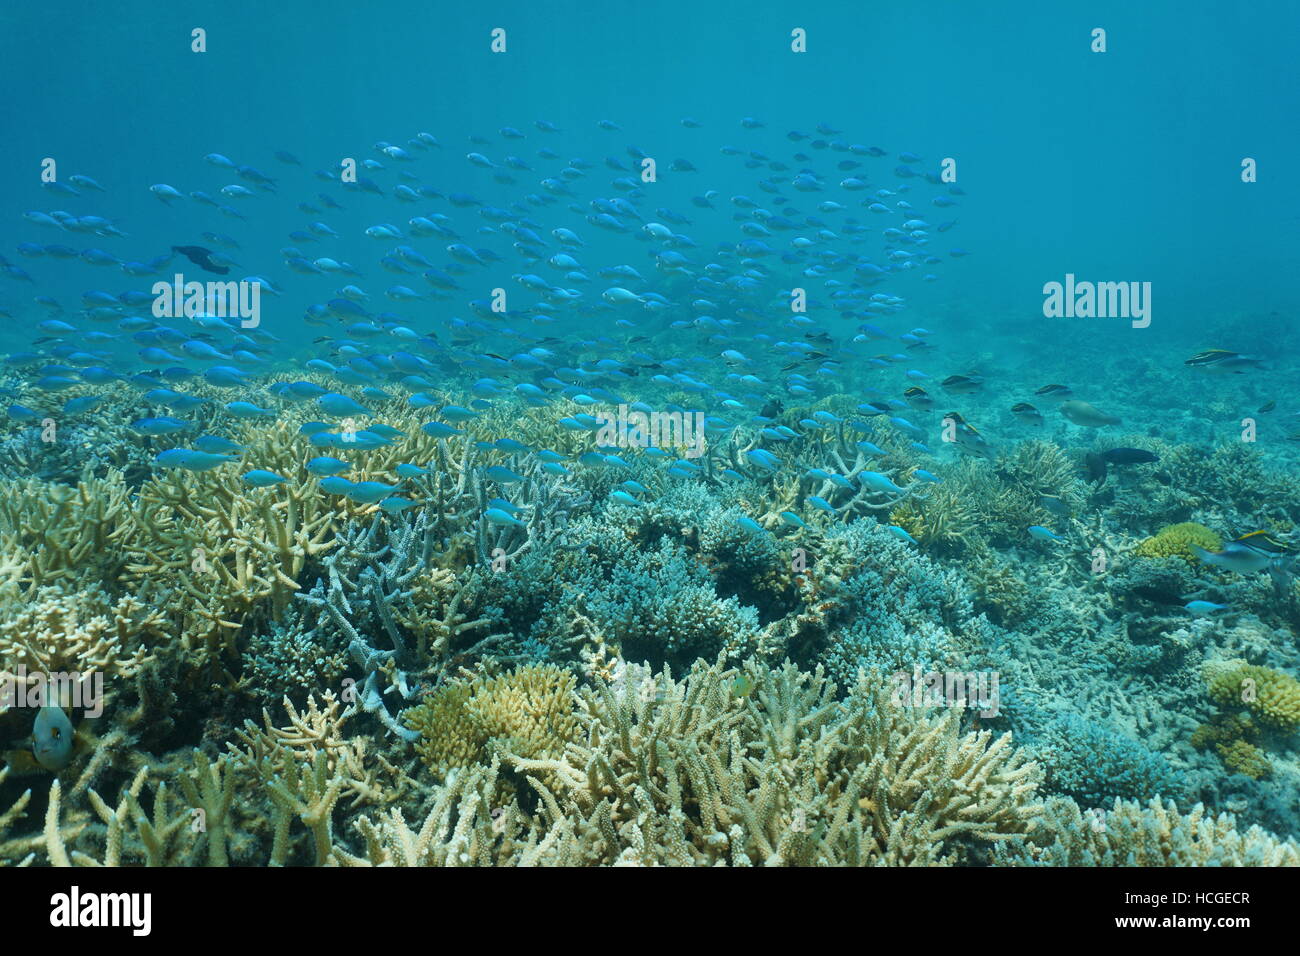 Underwater coral reef with a school of fish Blue-green chromis, New Caledonia, south Pacific ocean Stock Photo